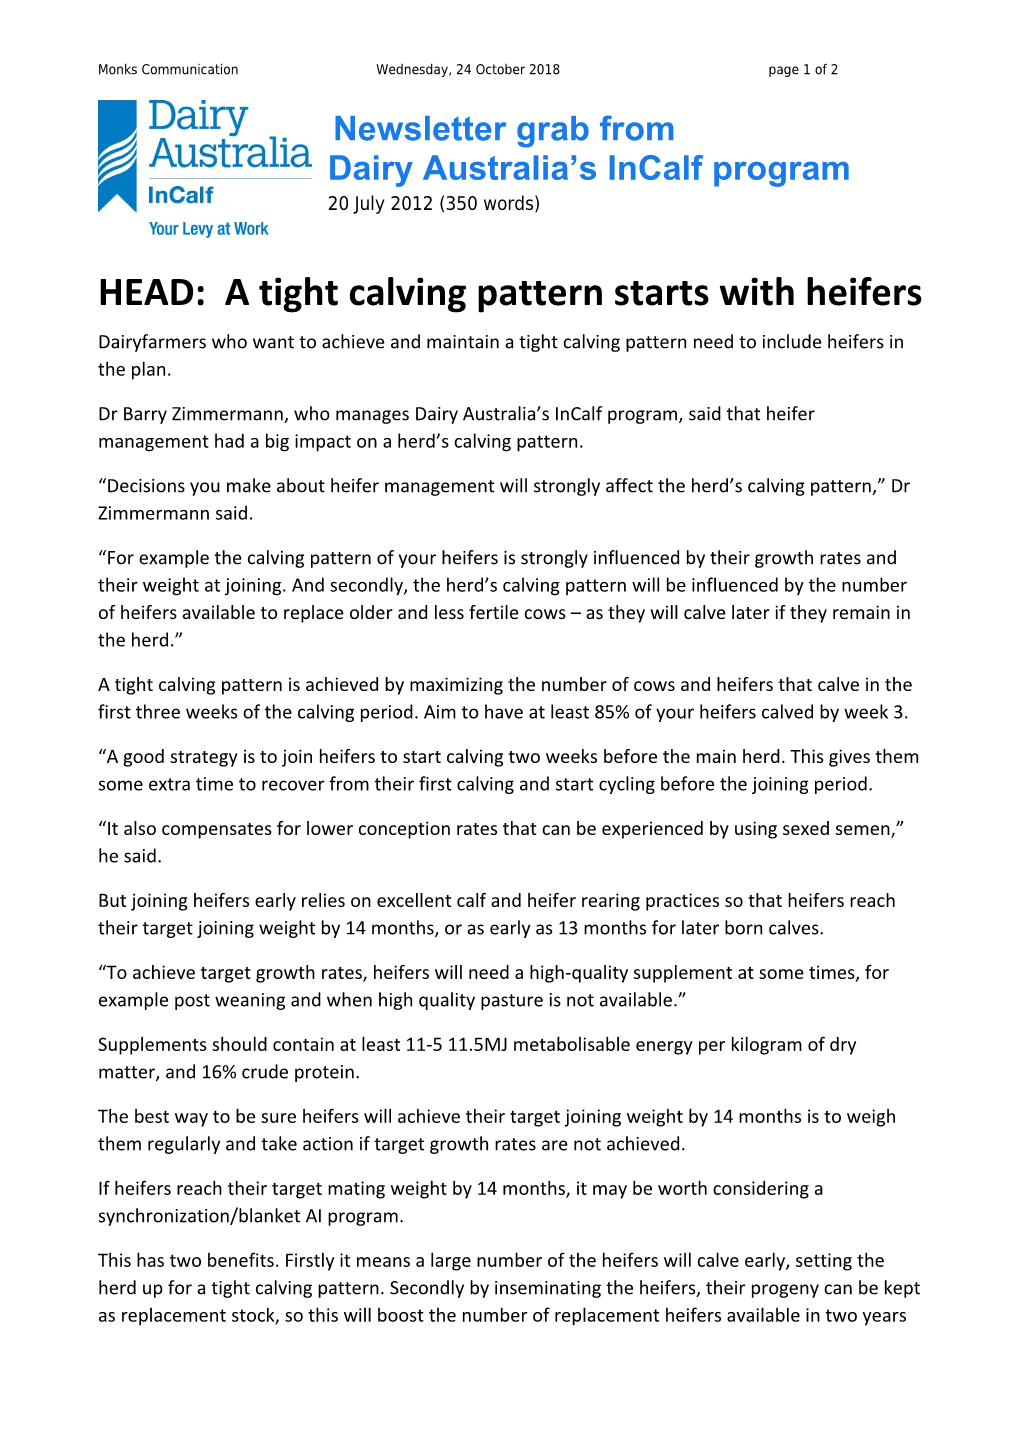 HEAD: a Tight Calving Pattern Starts with Heifers